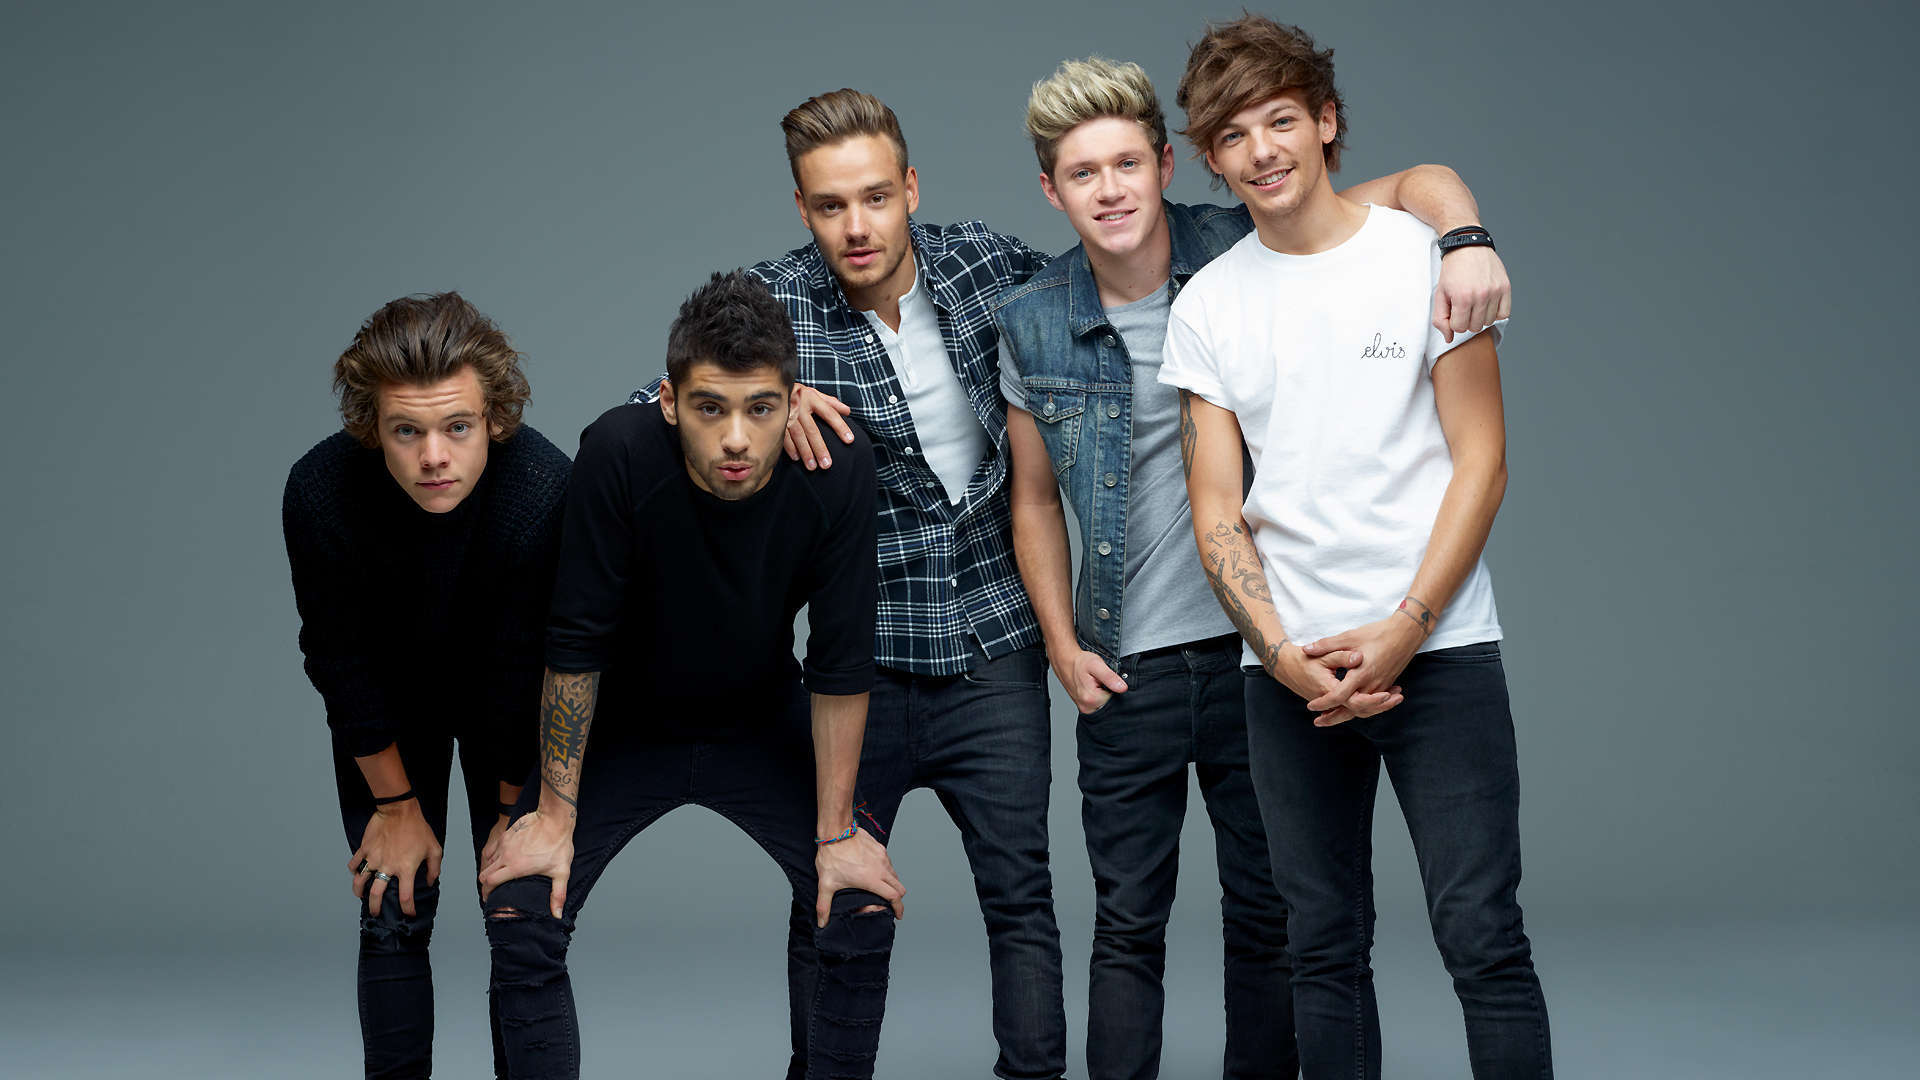 Wallpaper Wallpapers De One Direction 2015 Upload at April 22 2015 1920x1080